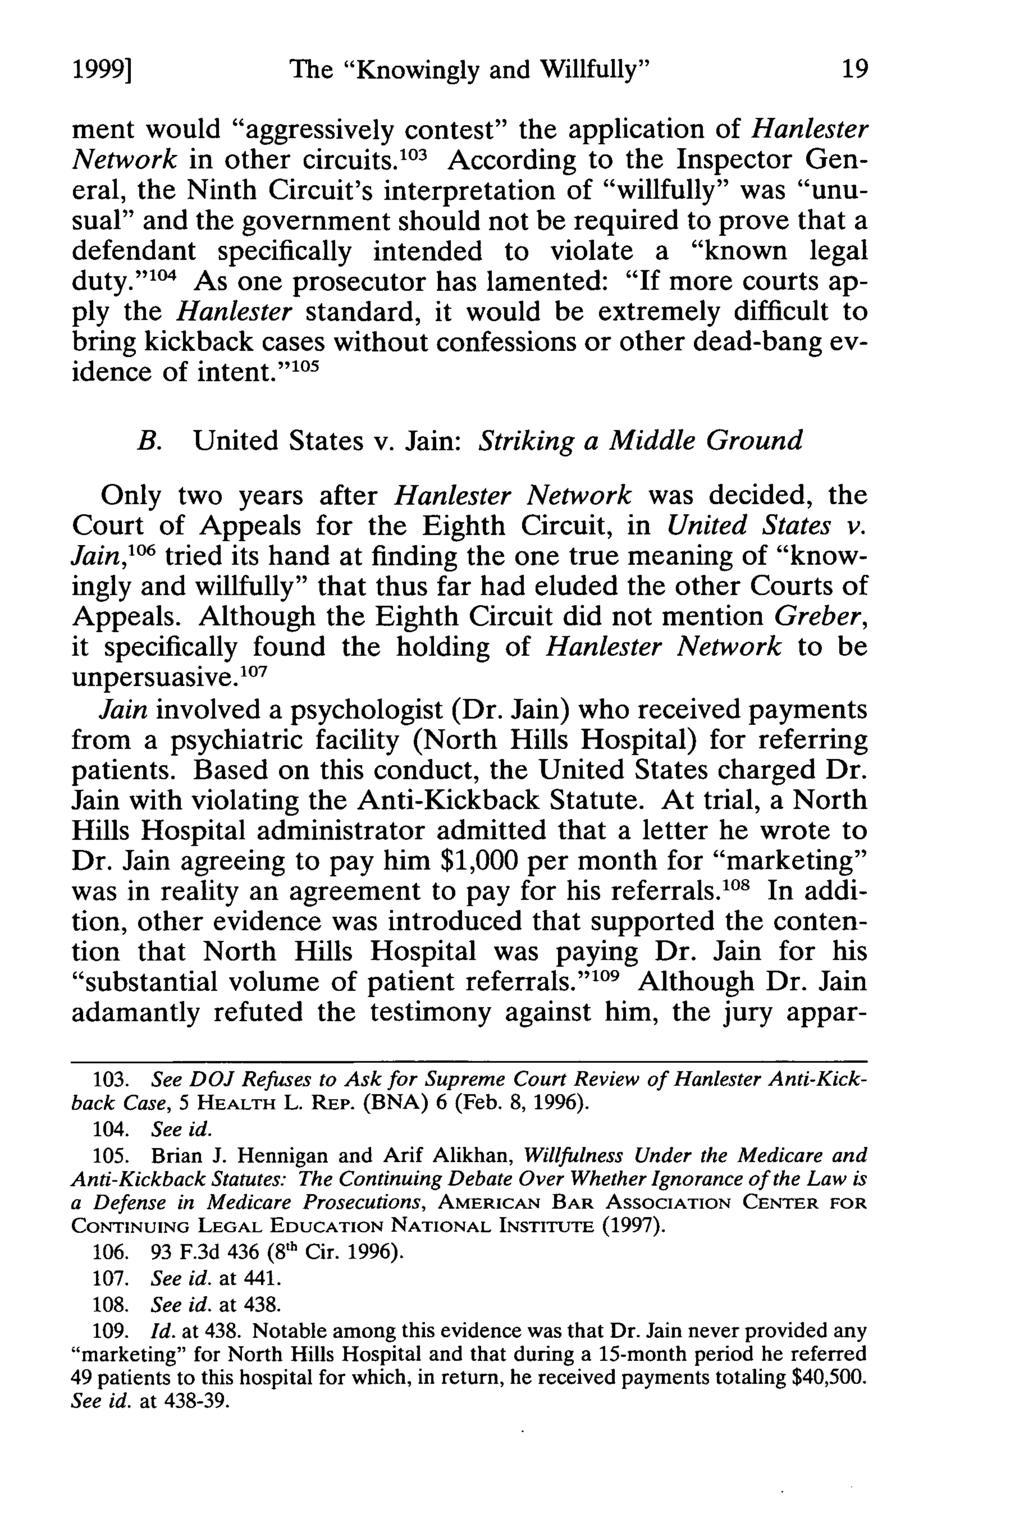 1999] Blair: The "Knowingly and Willfully" Continuum of the Anti-Kickback Stat The "Knowingly and Willfully" ment would "aggressively contest" the application of Hanlester Network in other circuits.